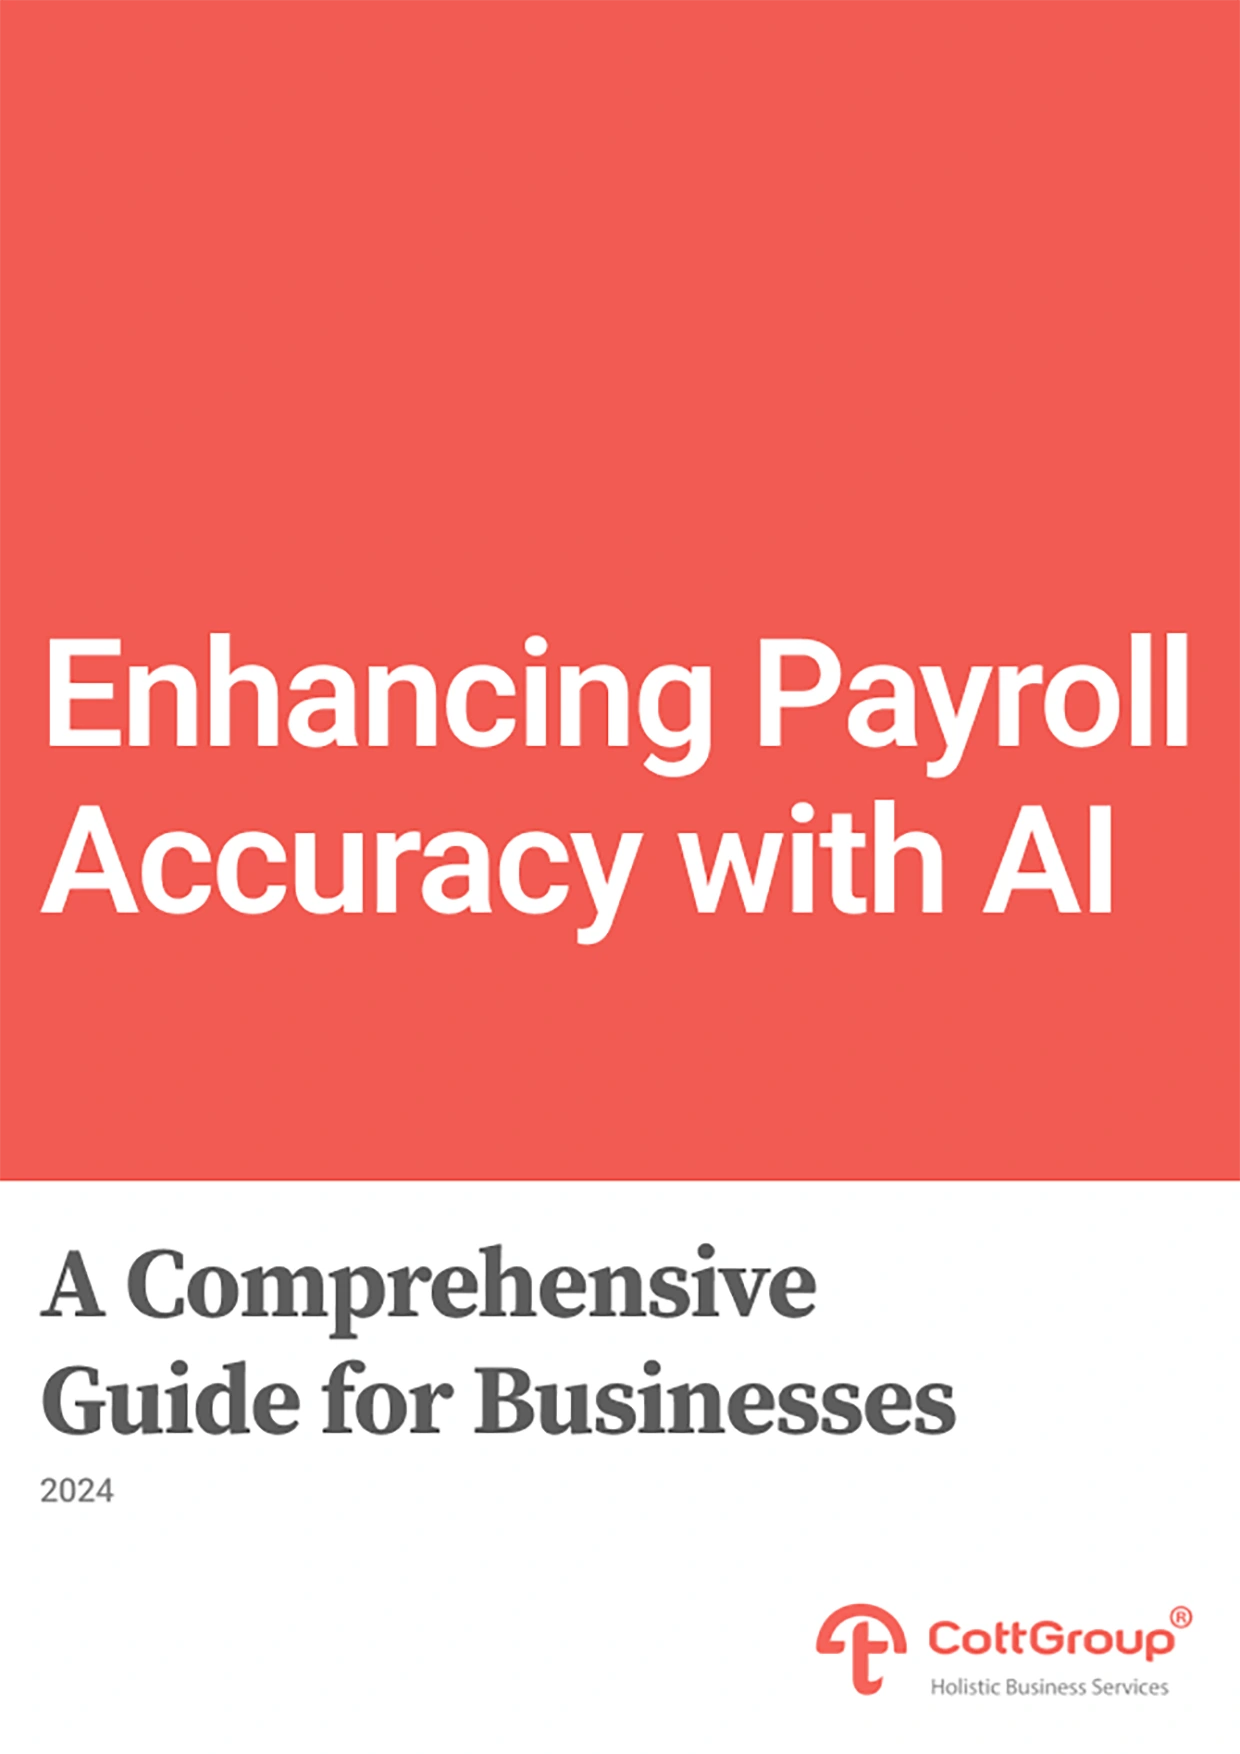 Enhancing Payroll Accuracy with AI